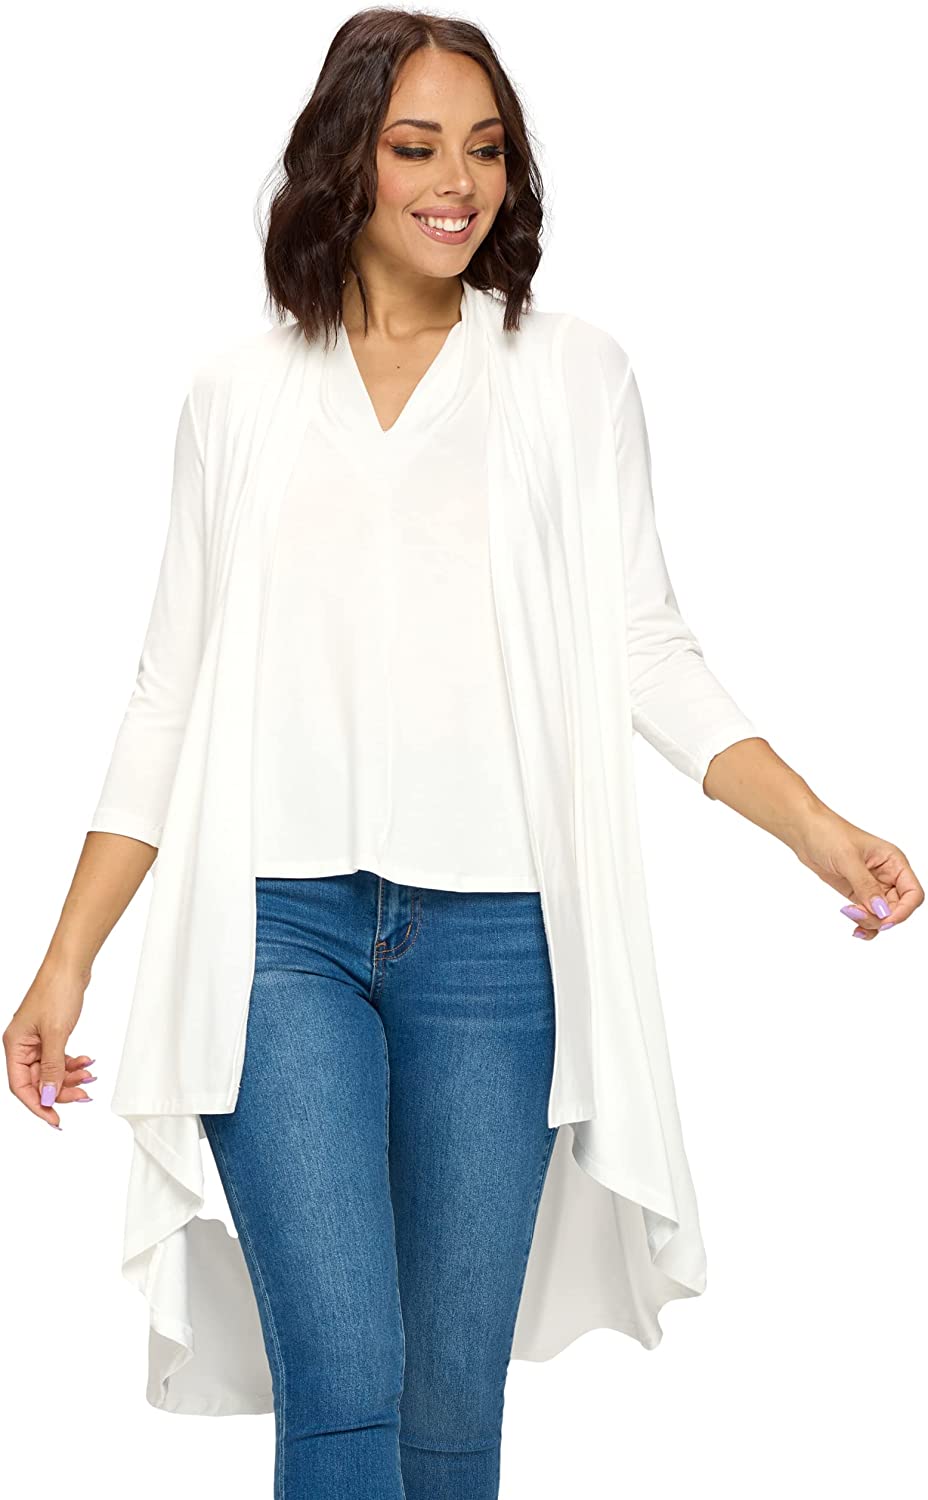 Women's 3/4 Sleeve Extra Soft Open Front Casual Flowy Bamboo Cardigan Made in USA